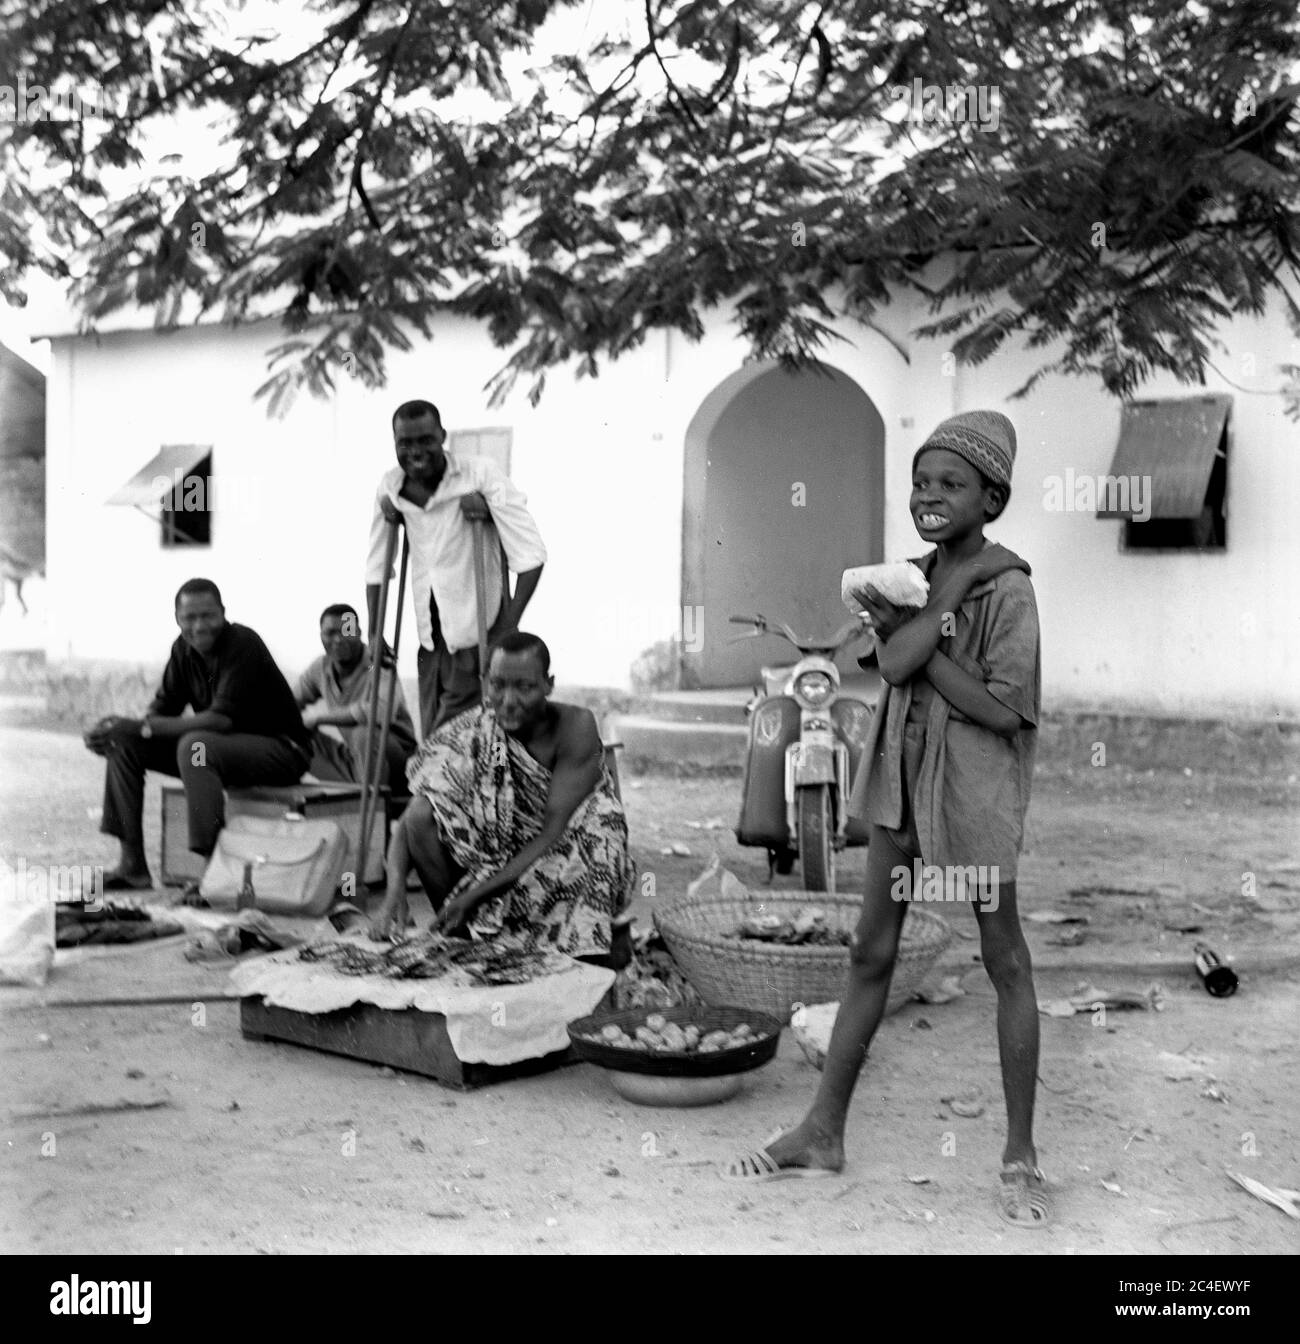 Men and a boy selling food and souvenirs in the Ivory Coast 1963 Cote d'Ivoire Ivory Coast 1960s Stock Photo